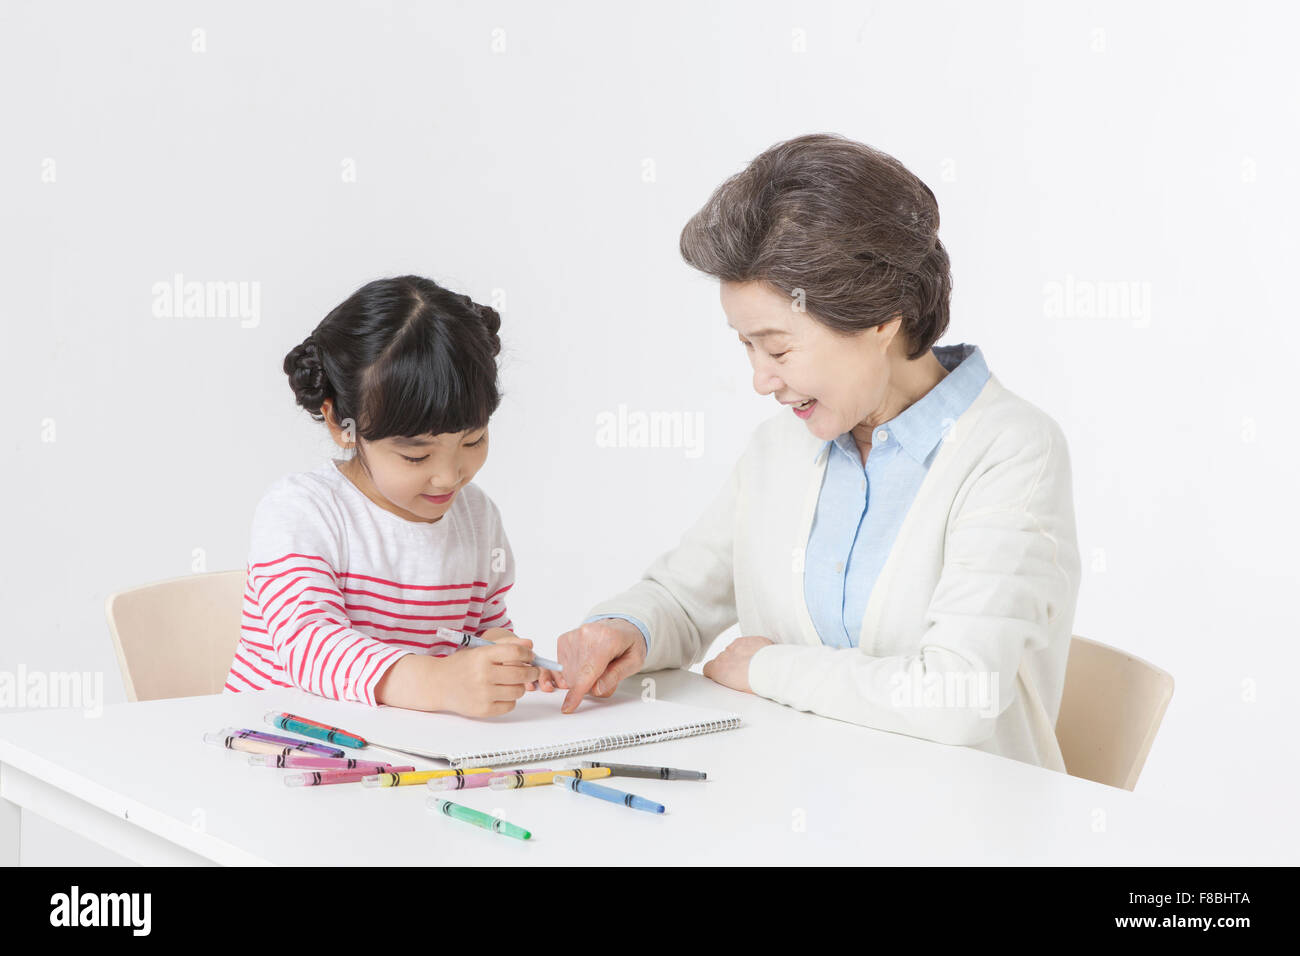 https://c8.alamy.com/comp/F8BHTA/young-girl-drawing-on-sketch-pad-with-color-pencils-and-her-grandmother-F8BHTA.jpg